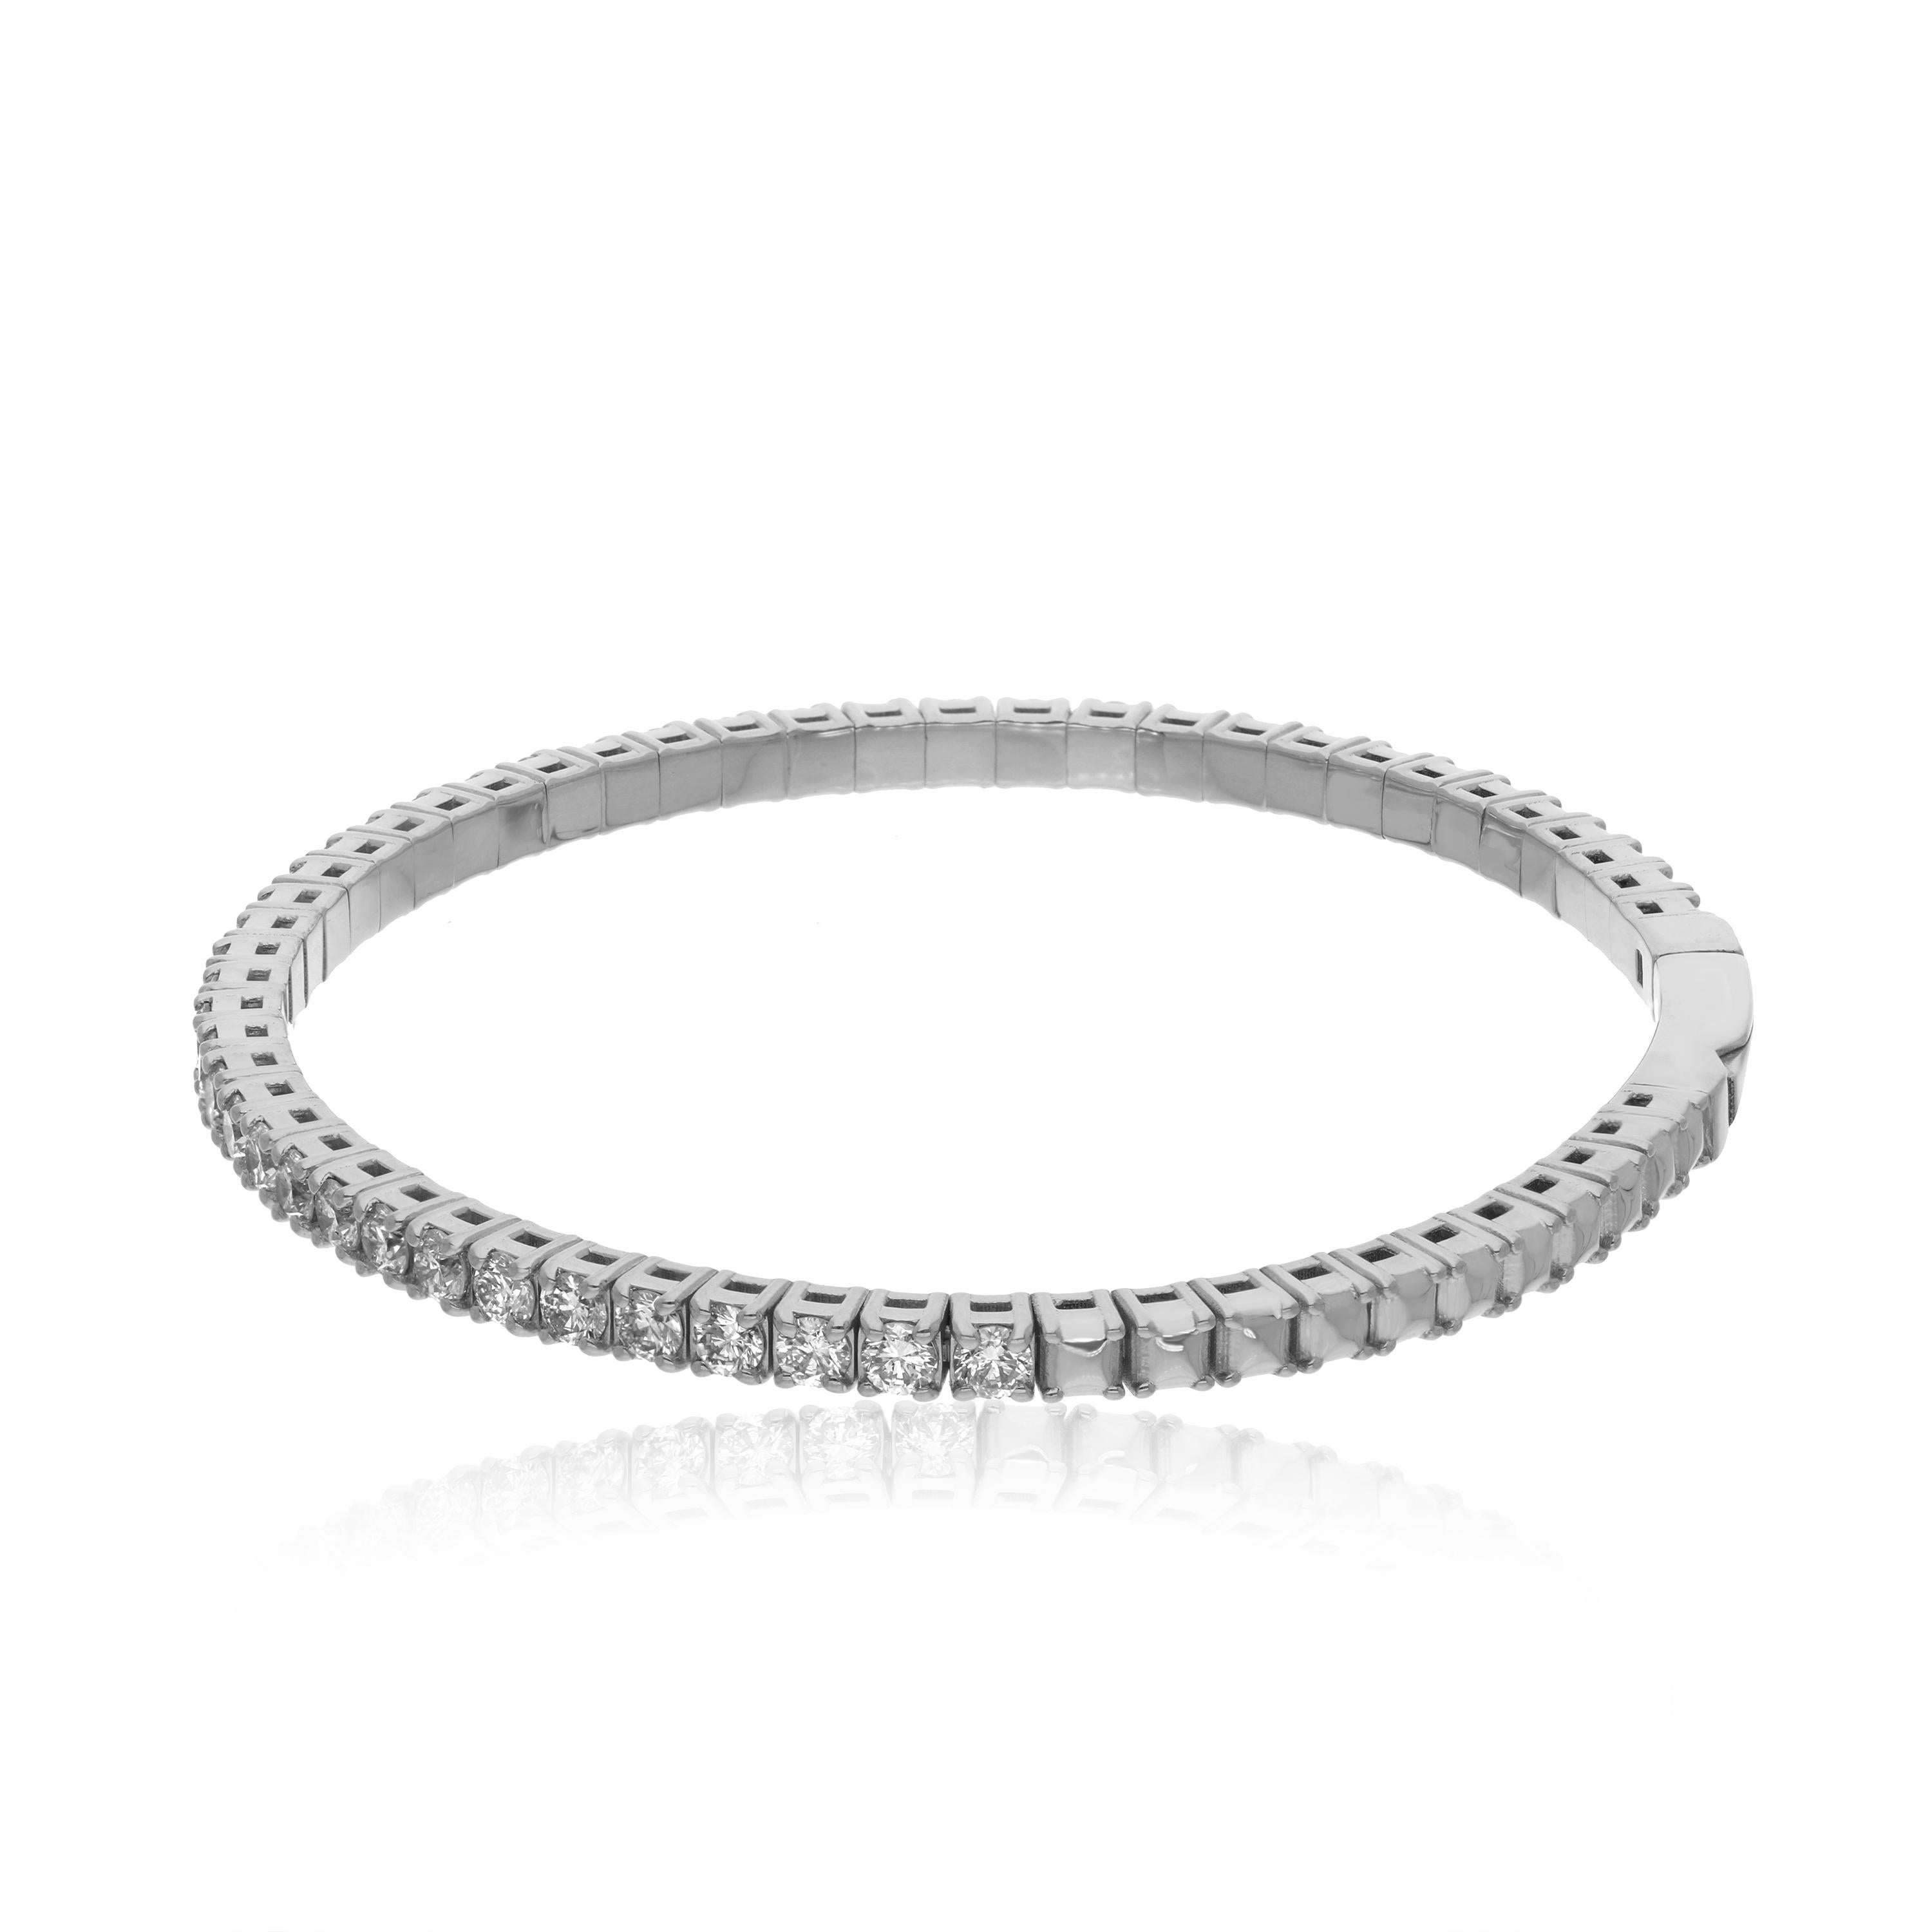 Make a statement with our stunning Gold Diamond Eternity Tennis Bracelet. Crafted with exquisite attention to detail, this piece is perfect for adding a touch of luxury to any outfit. The half eternity design features dazzling diamonds set in 18k